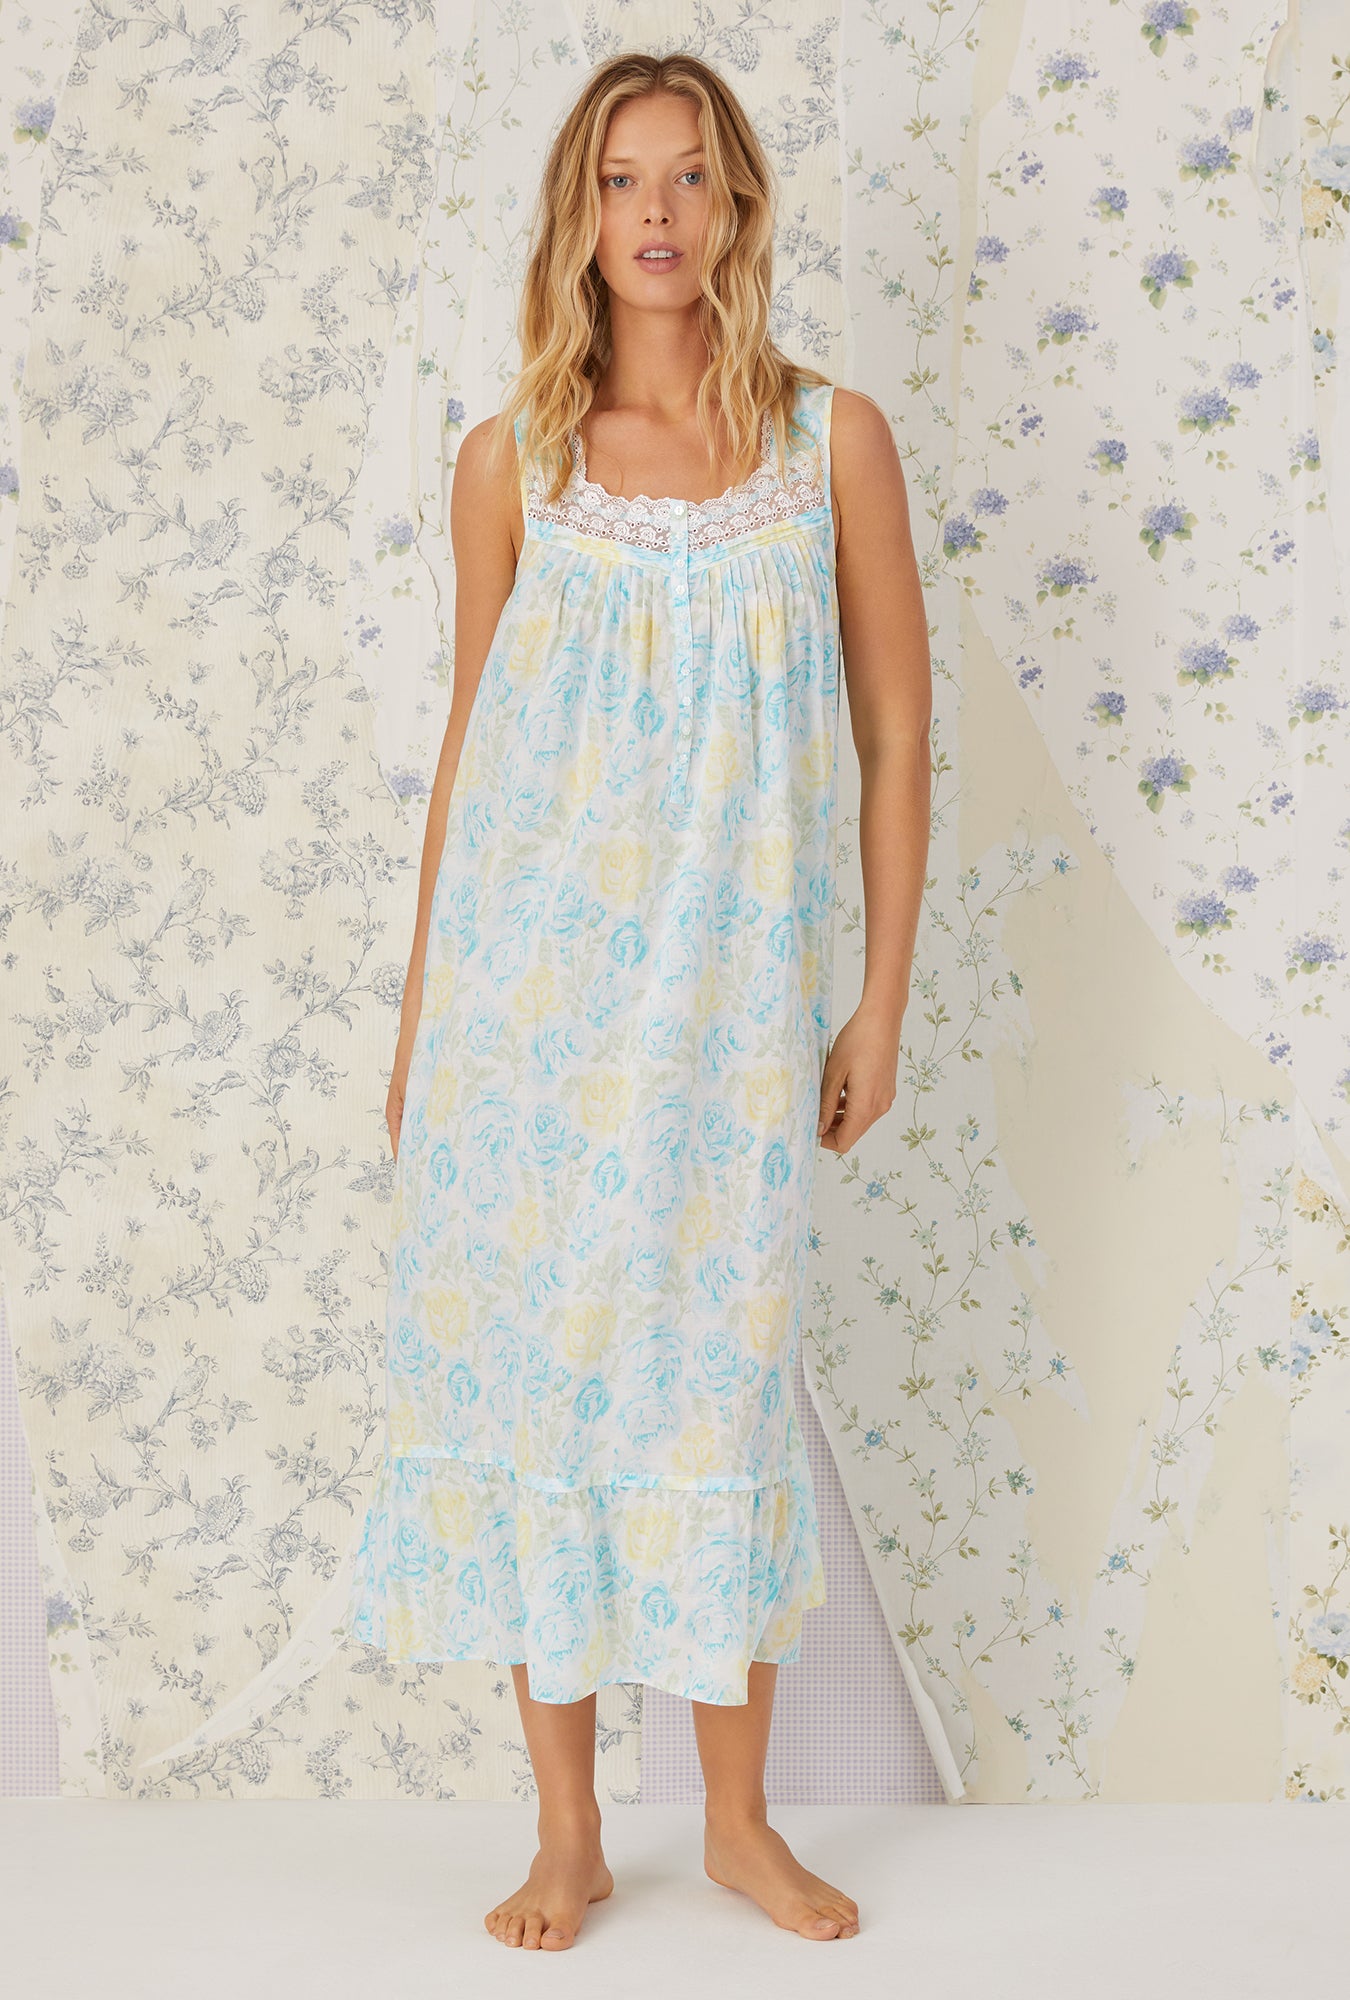 A lady wearing aqua sleeveless cotton lawn nightgown with floral pattern.